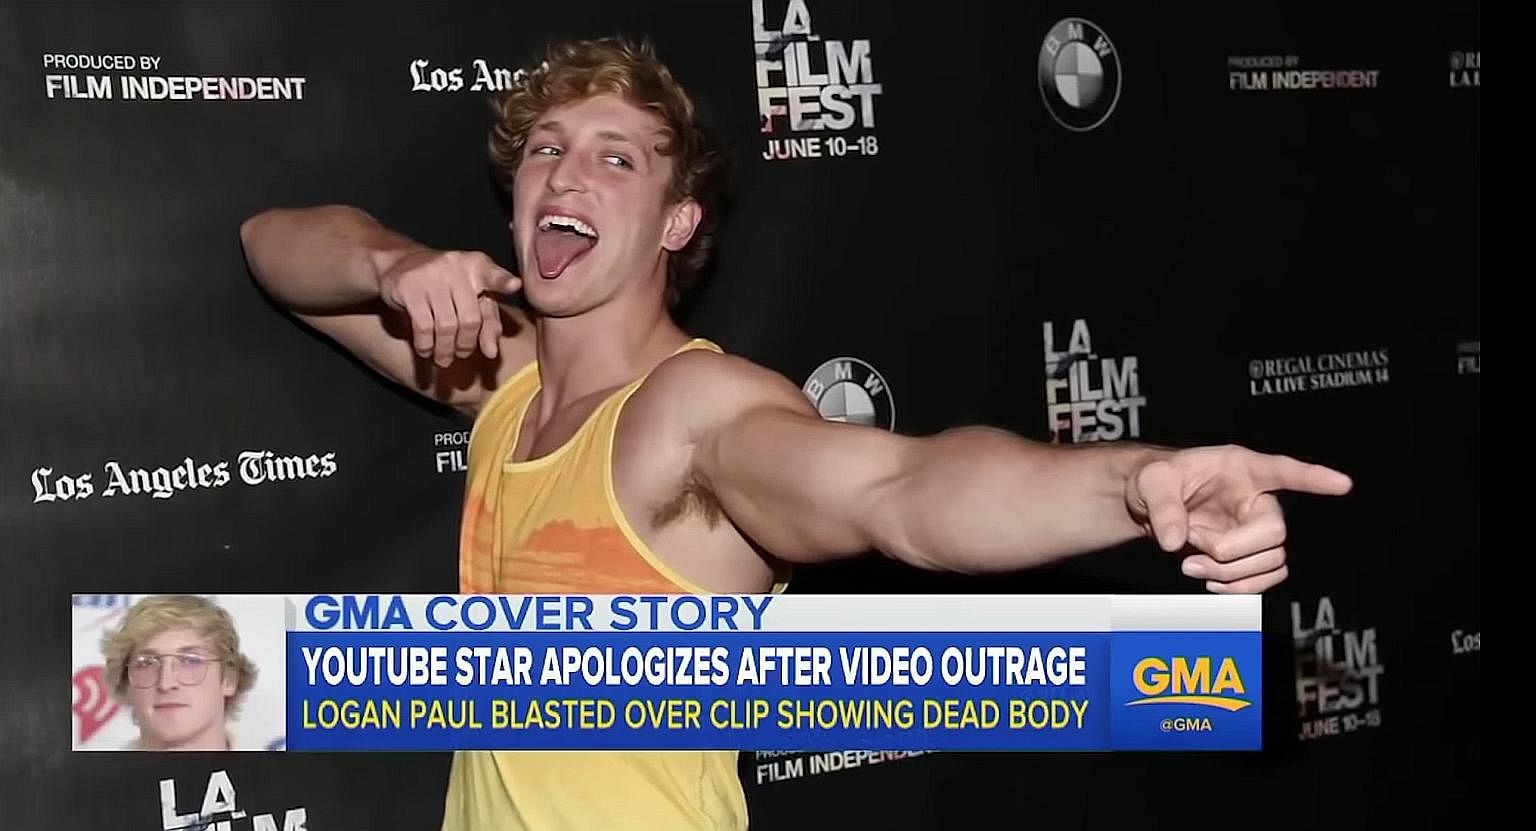 Logan Paul was back posting videos after a three-week absence following outrage over his post of a suicide victim. But his latest shenanigans did not go down well with YouTube.